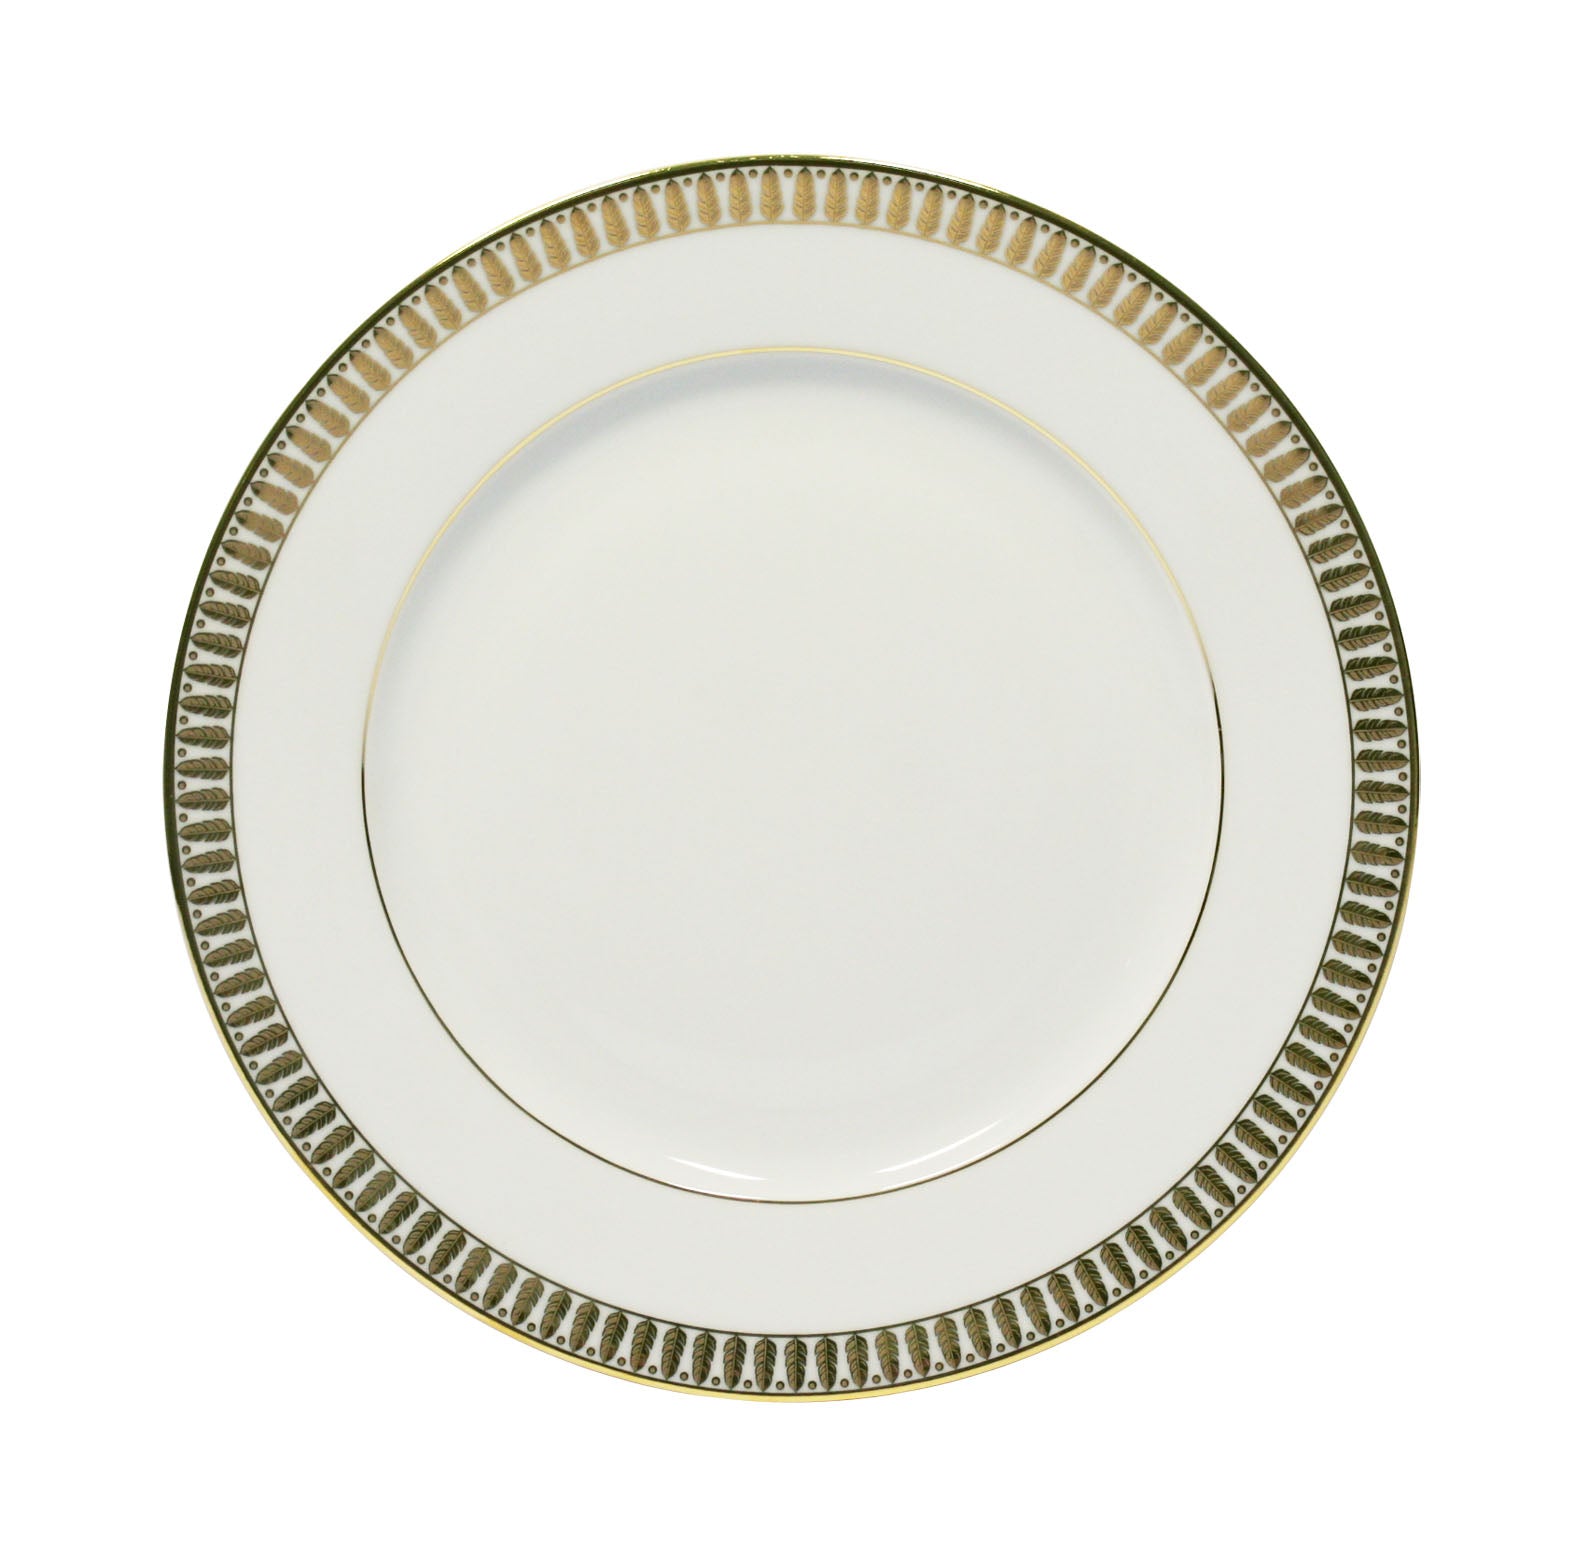 Plumes Dessert Plate in Gold